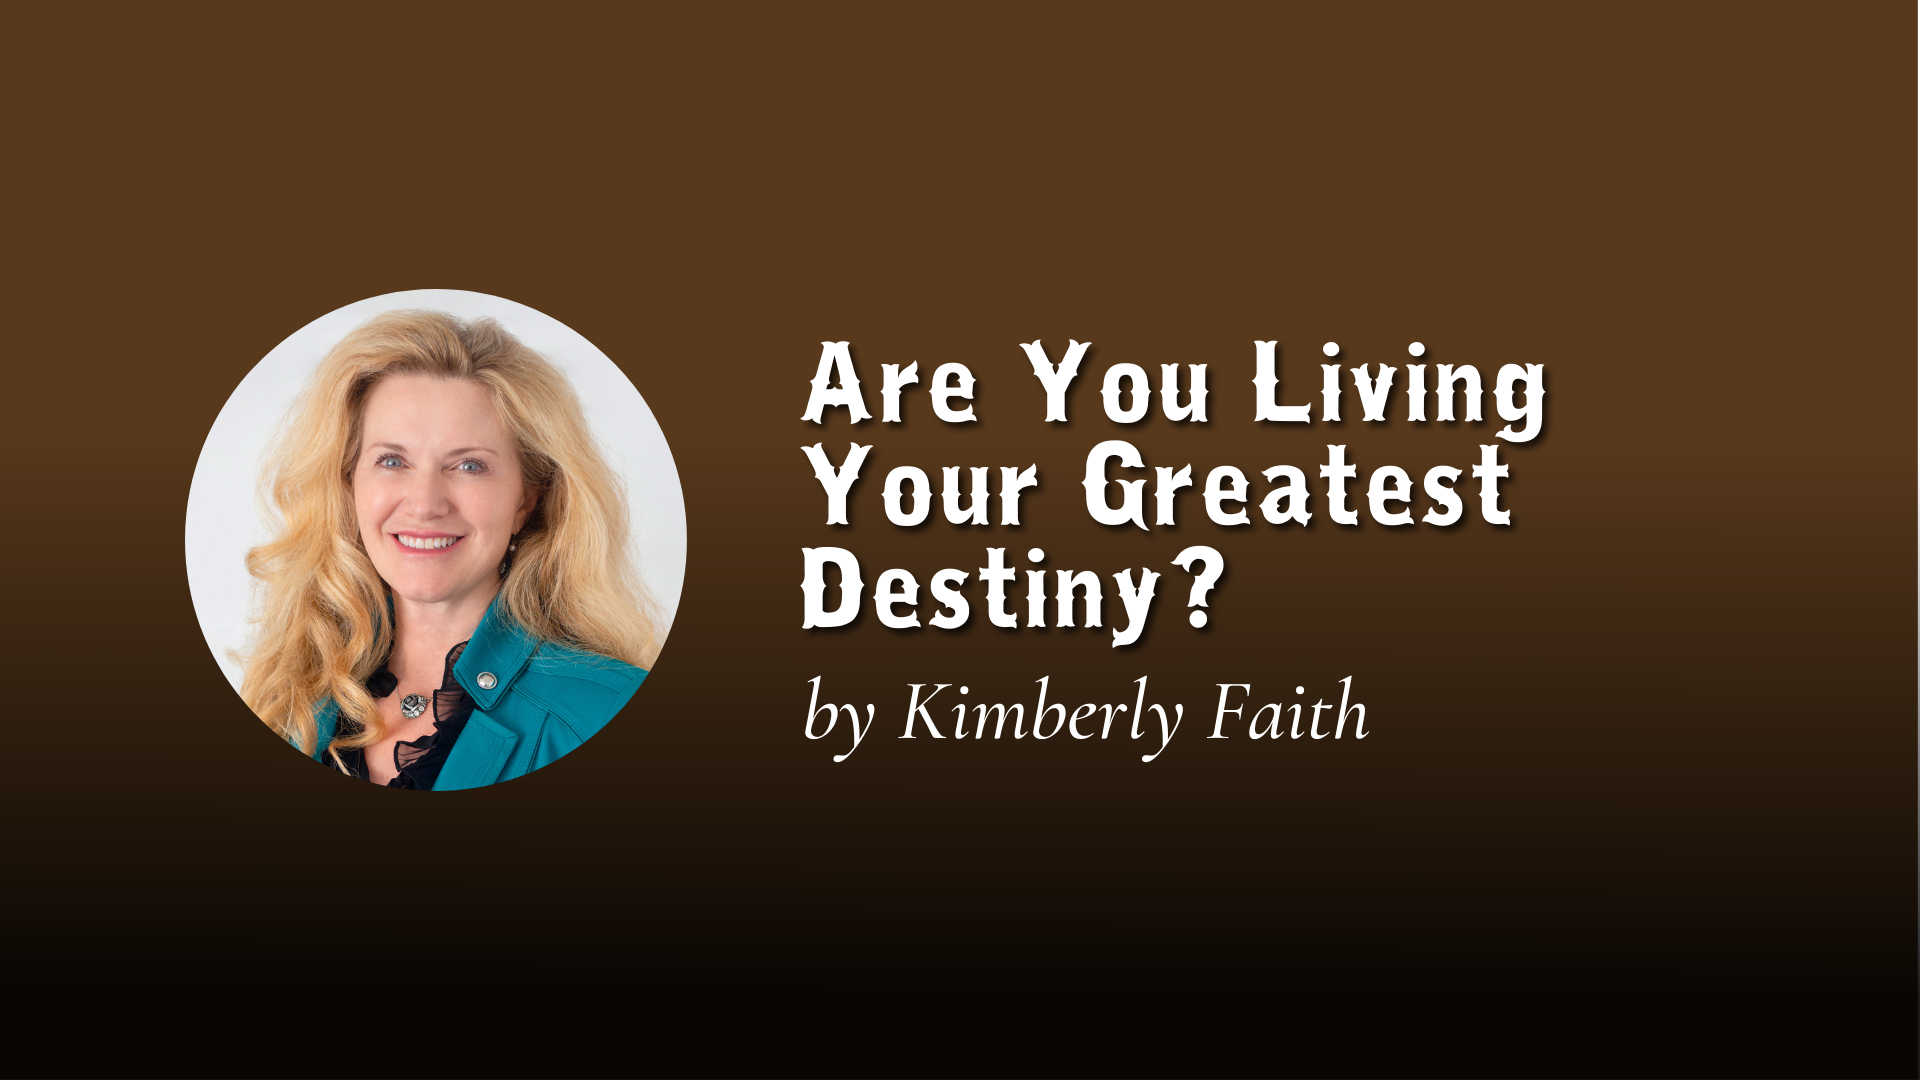 Are You Living Your Greatest Destiny?